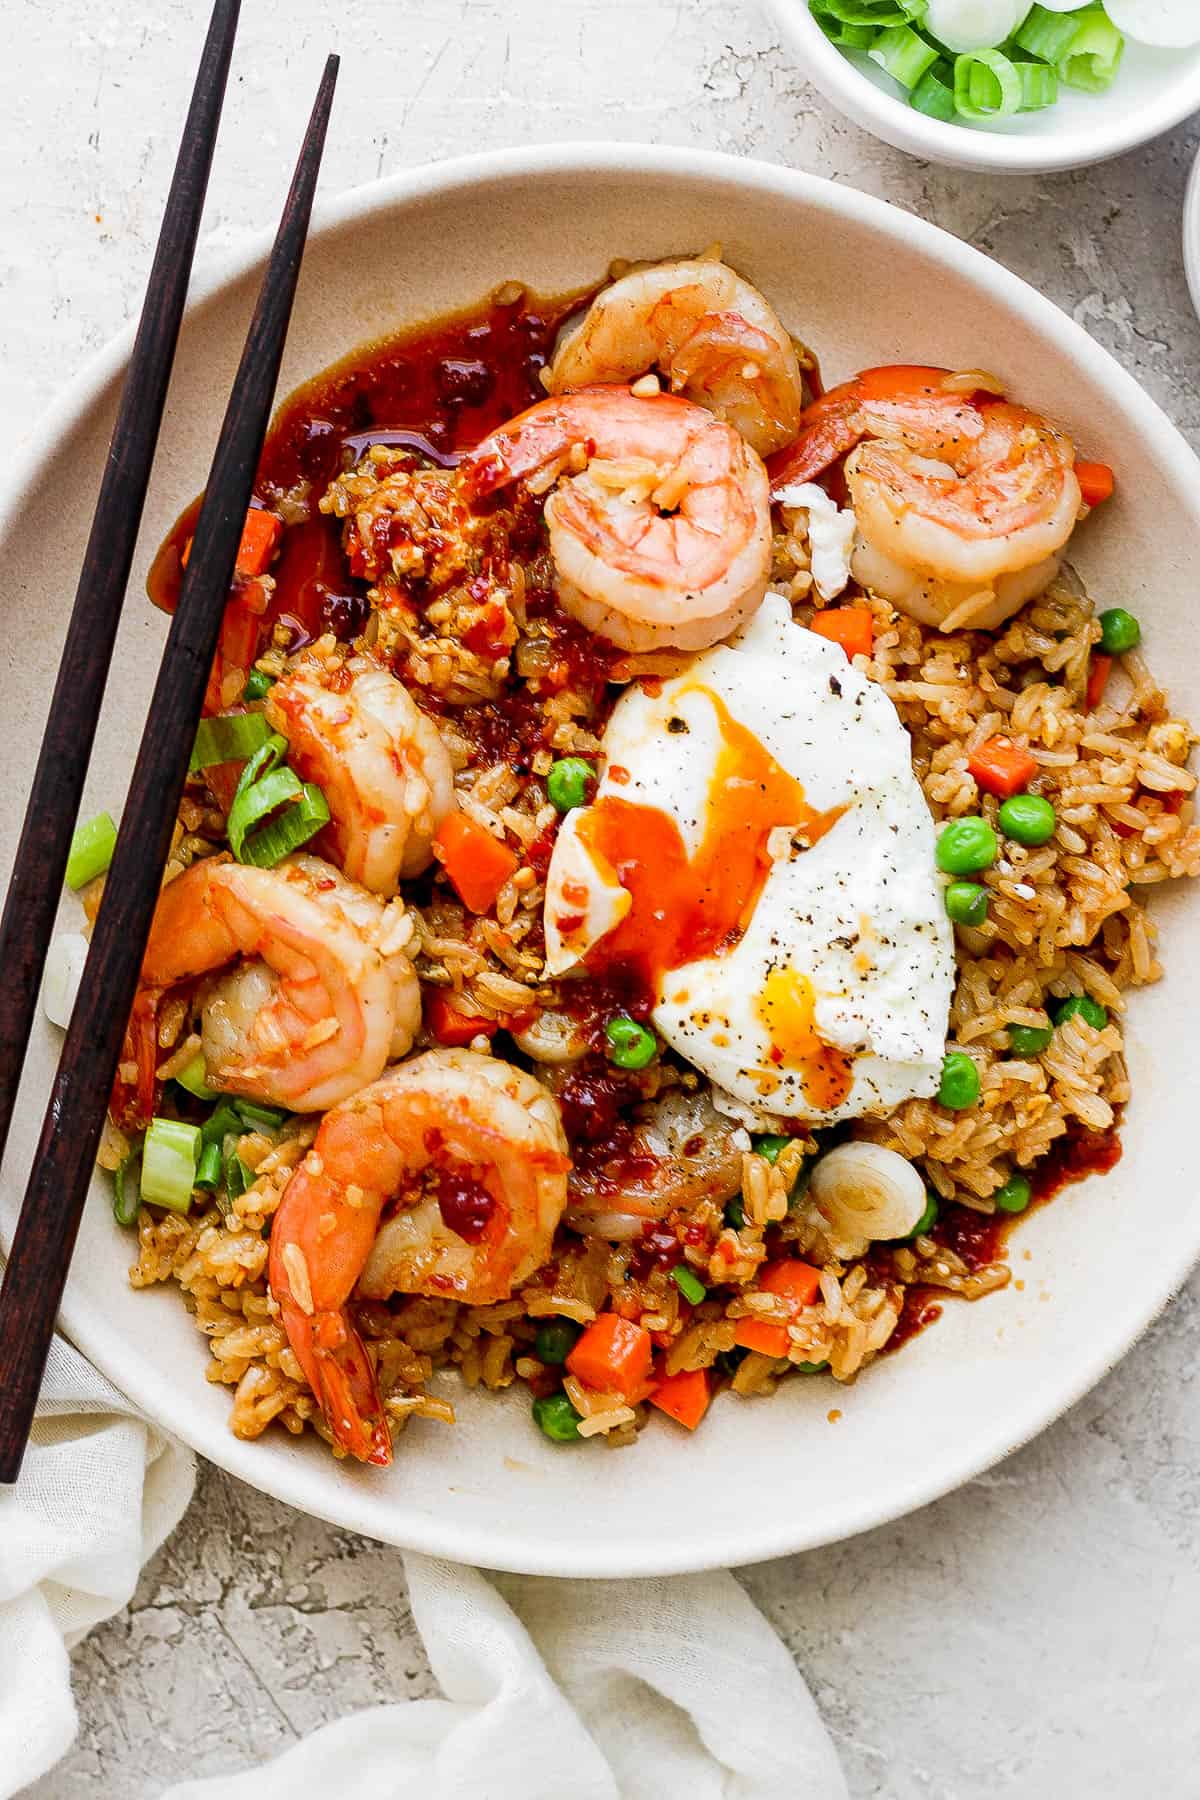 Shrimp fried rice in a bowl with chop sticks off to the side and a soft boiled egg on top.